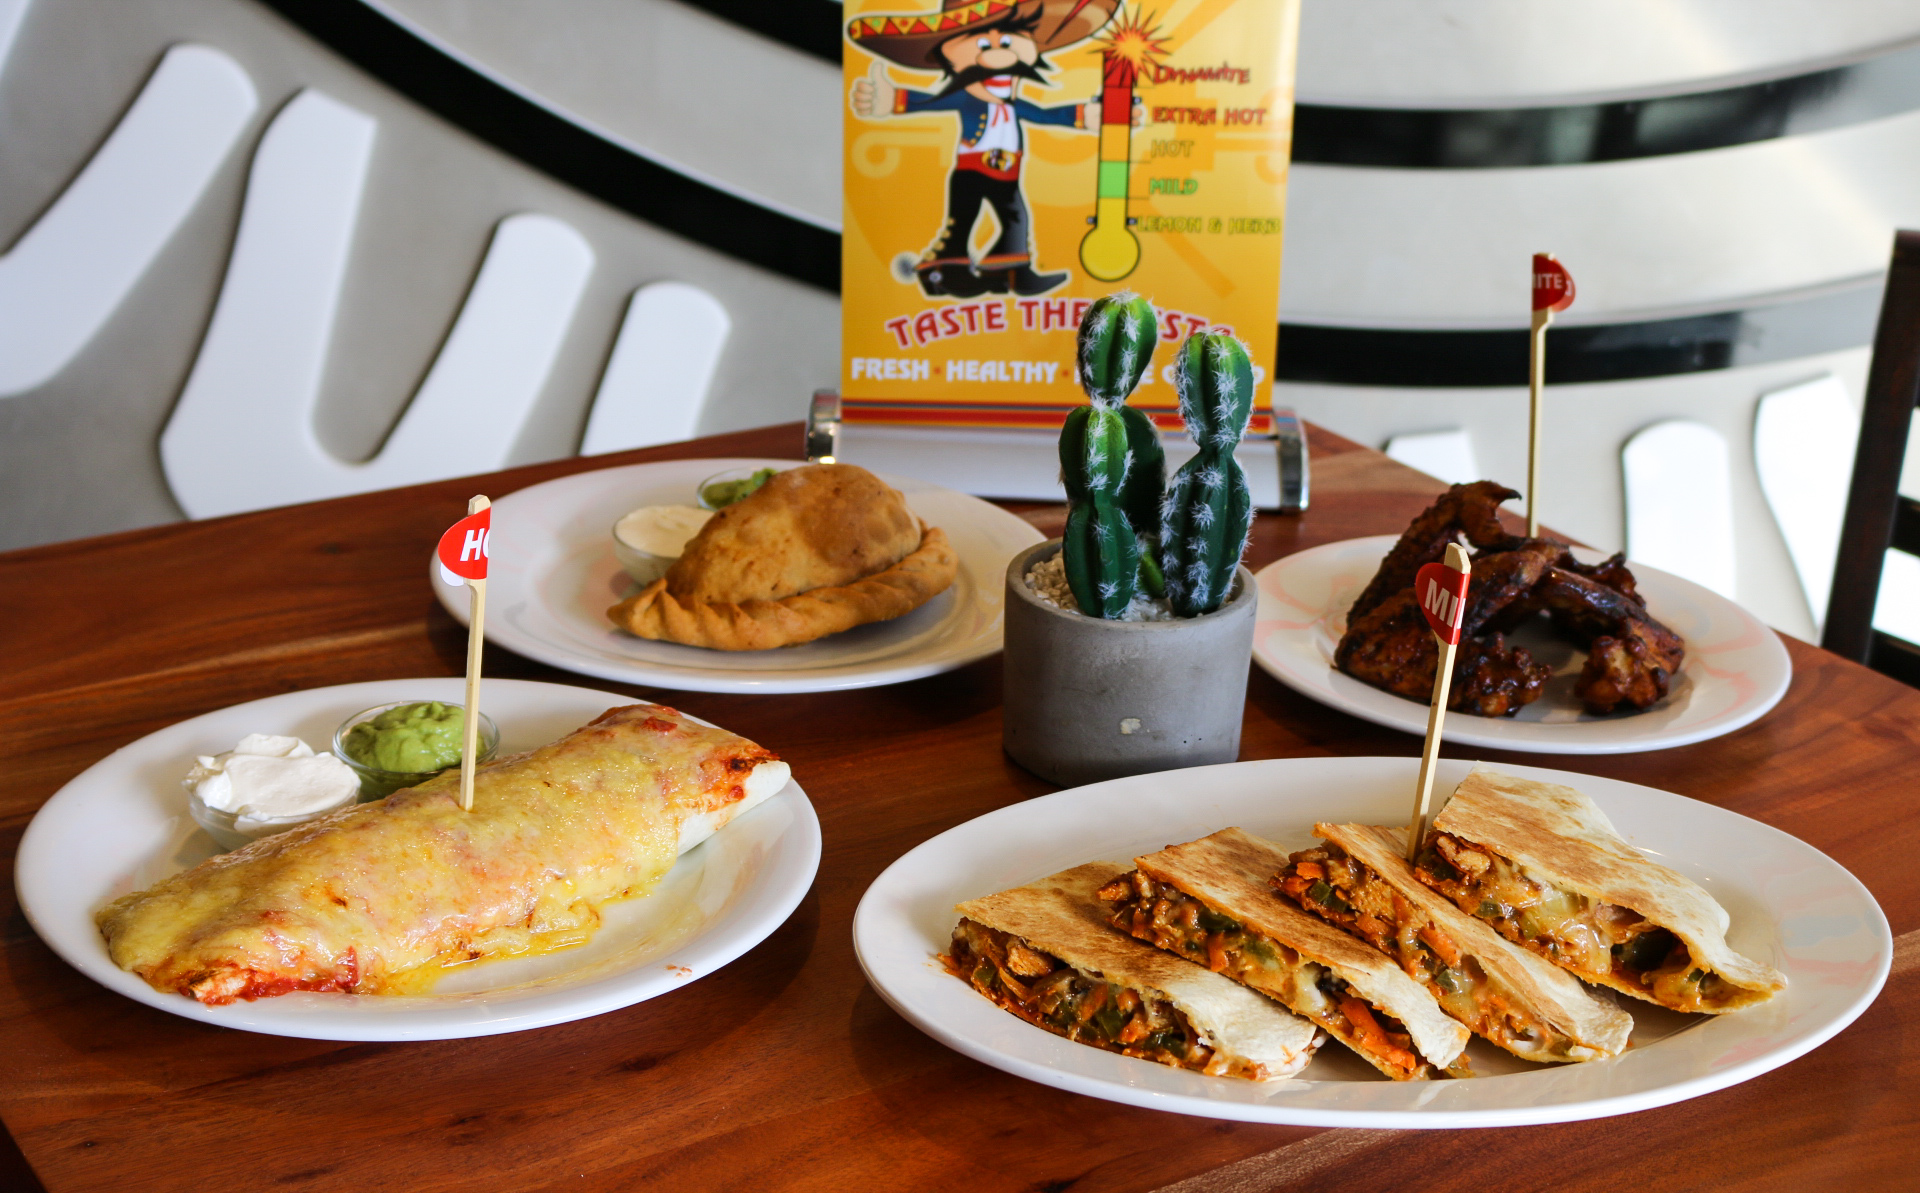 Hot in the City: Mochachos is dishing up flame-grilled chicken and Mexican food in Kingston